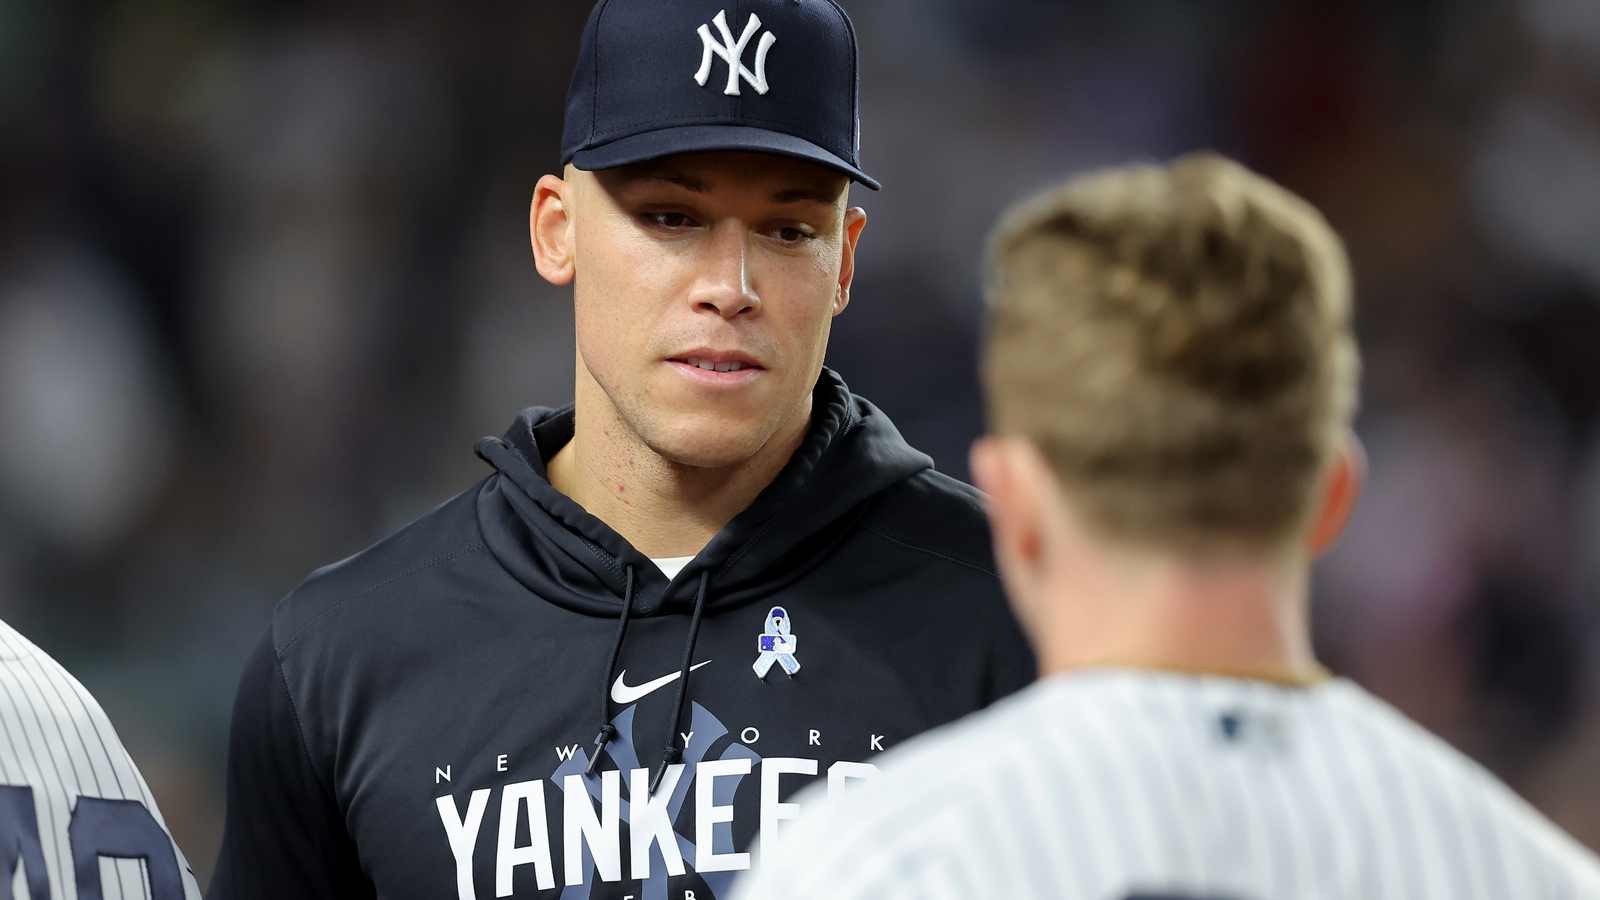 The Yankees lineup is crumbling beneath Aaron Judge in the ALCS. Does the  front office have a plan to solidify it?